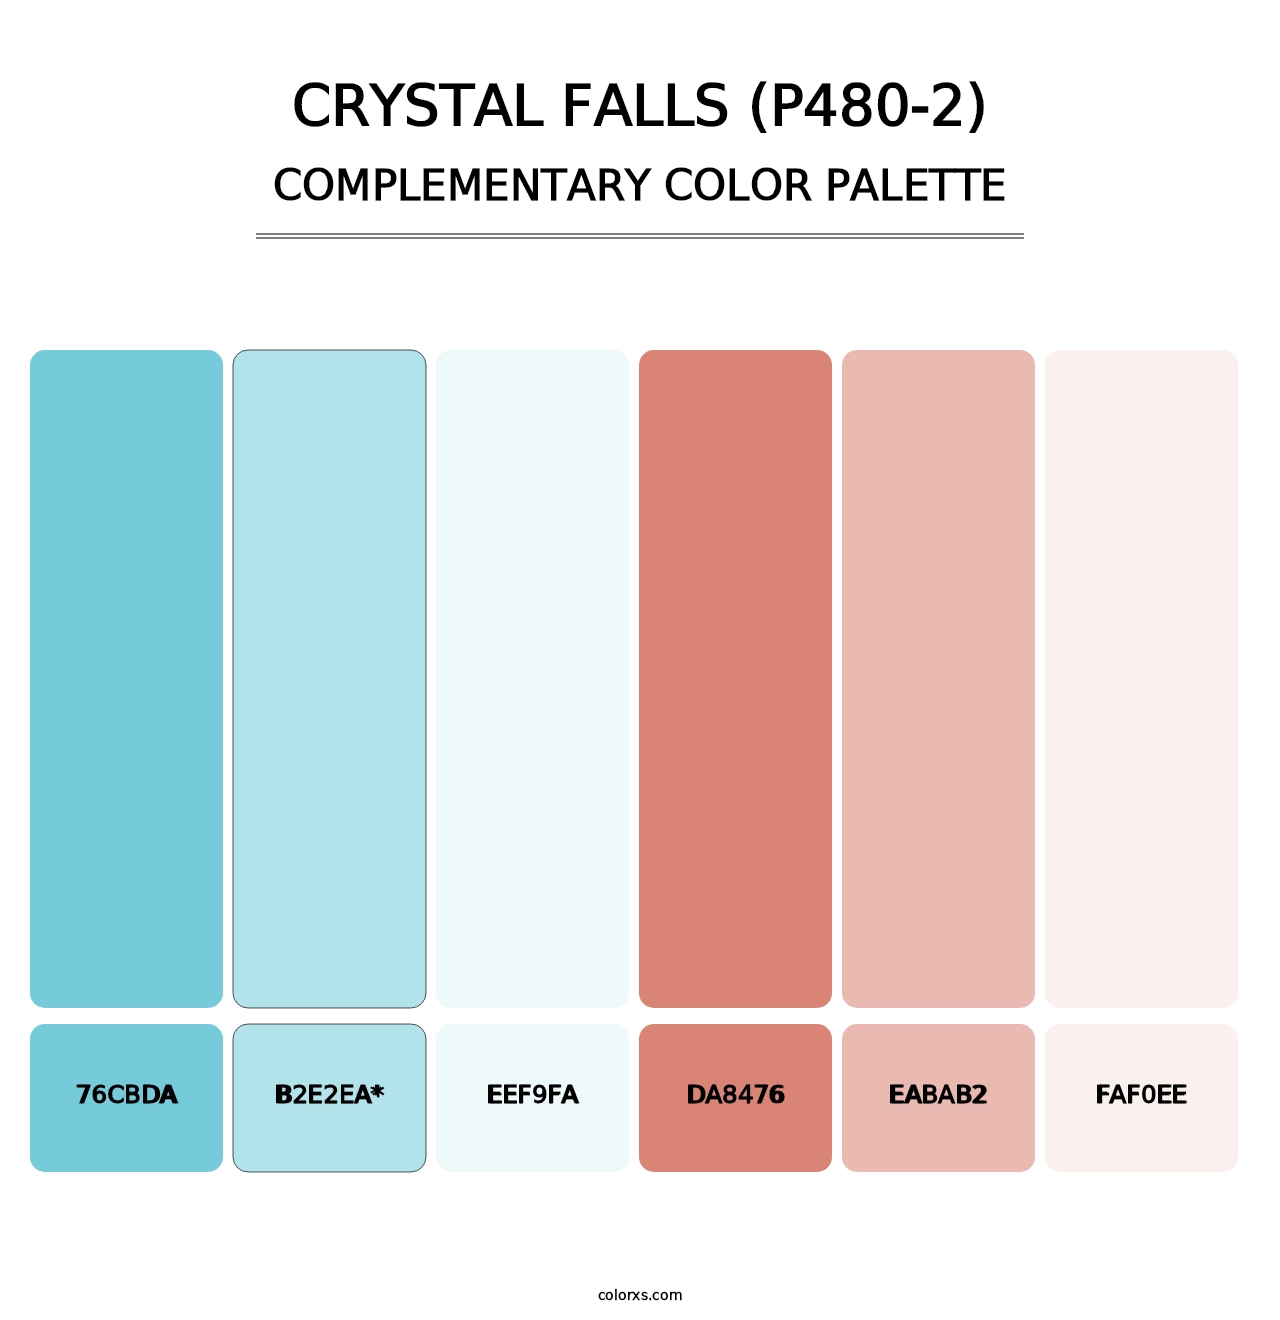 Crystal Falls (P480-2) - Complementary Color Palette